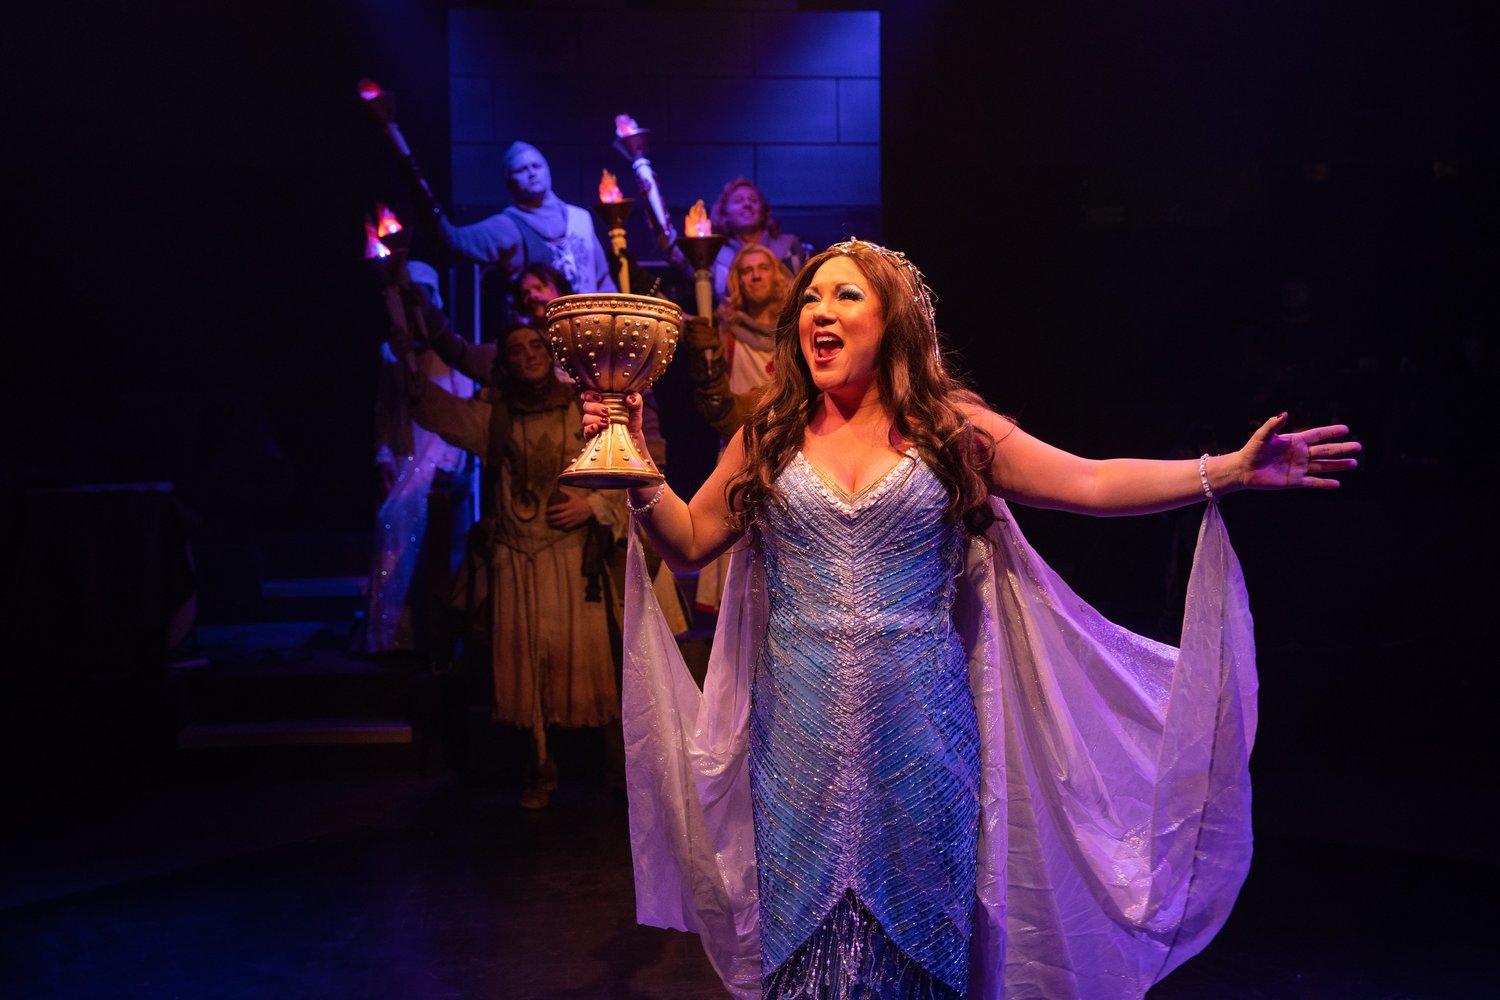 Janine Sunday plays the Lady of the Lake in “Monty Python’s Spamalot.”